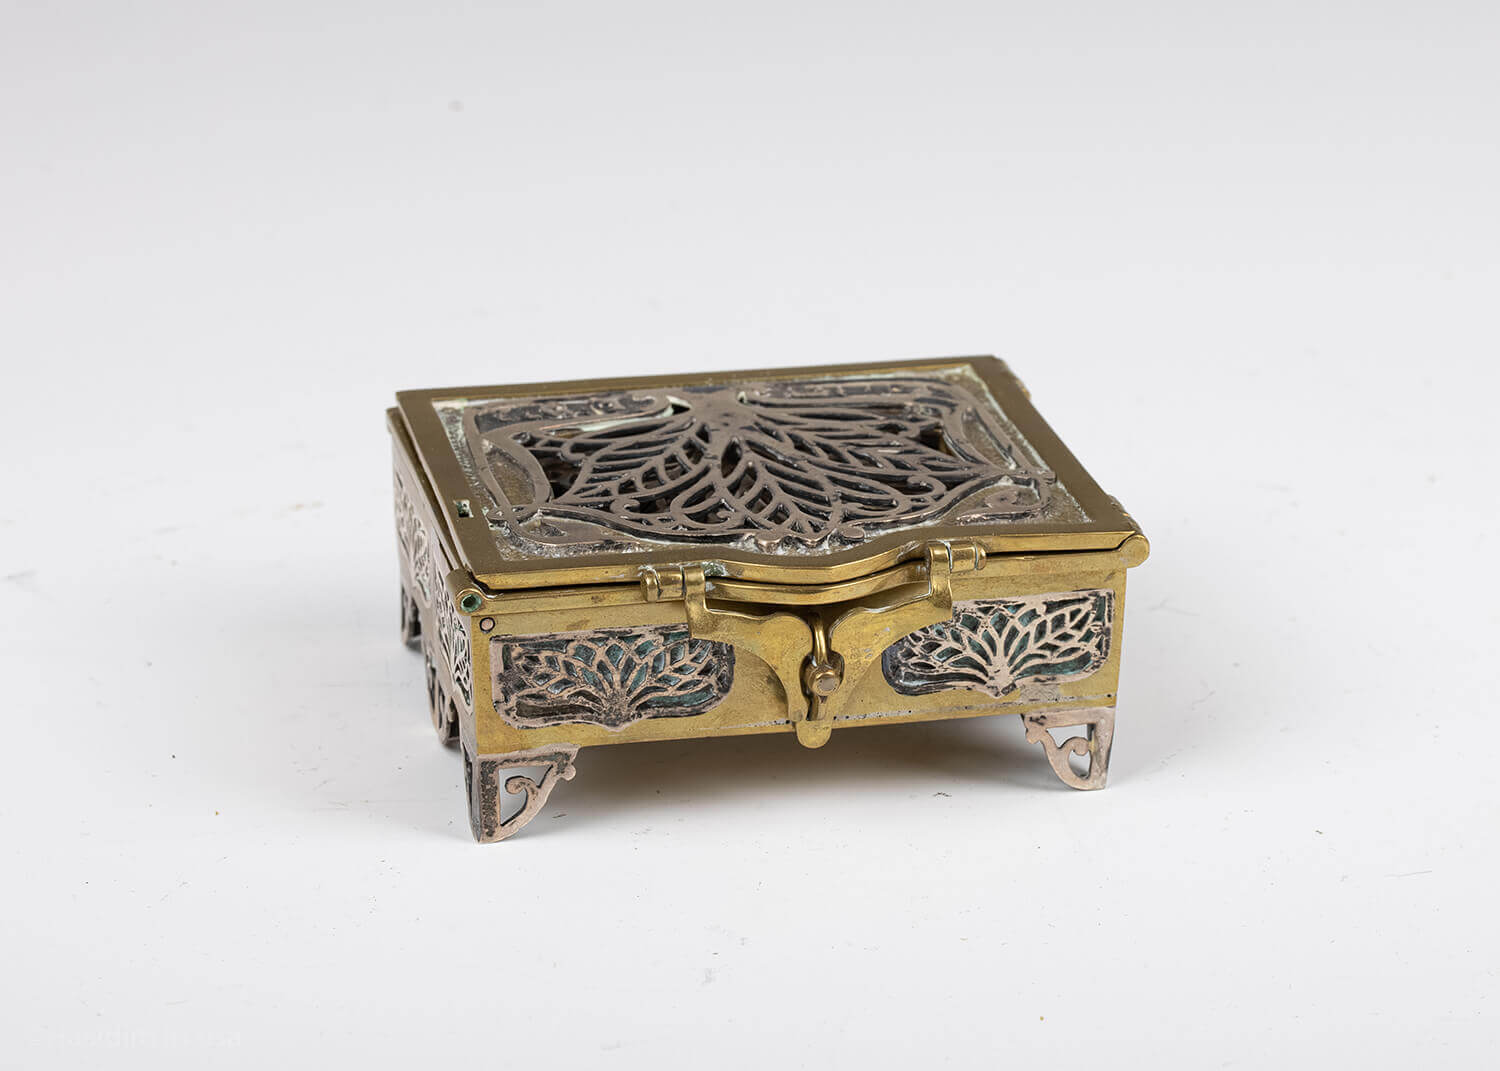 149. A BRASS AND STERLING SILVER SPICE BOX BY SWED MASTER SILVERSMITHS